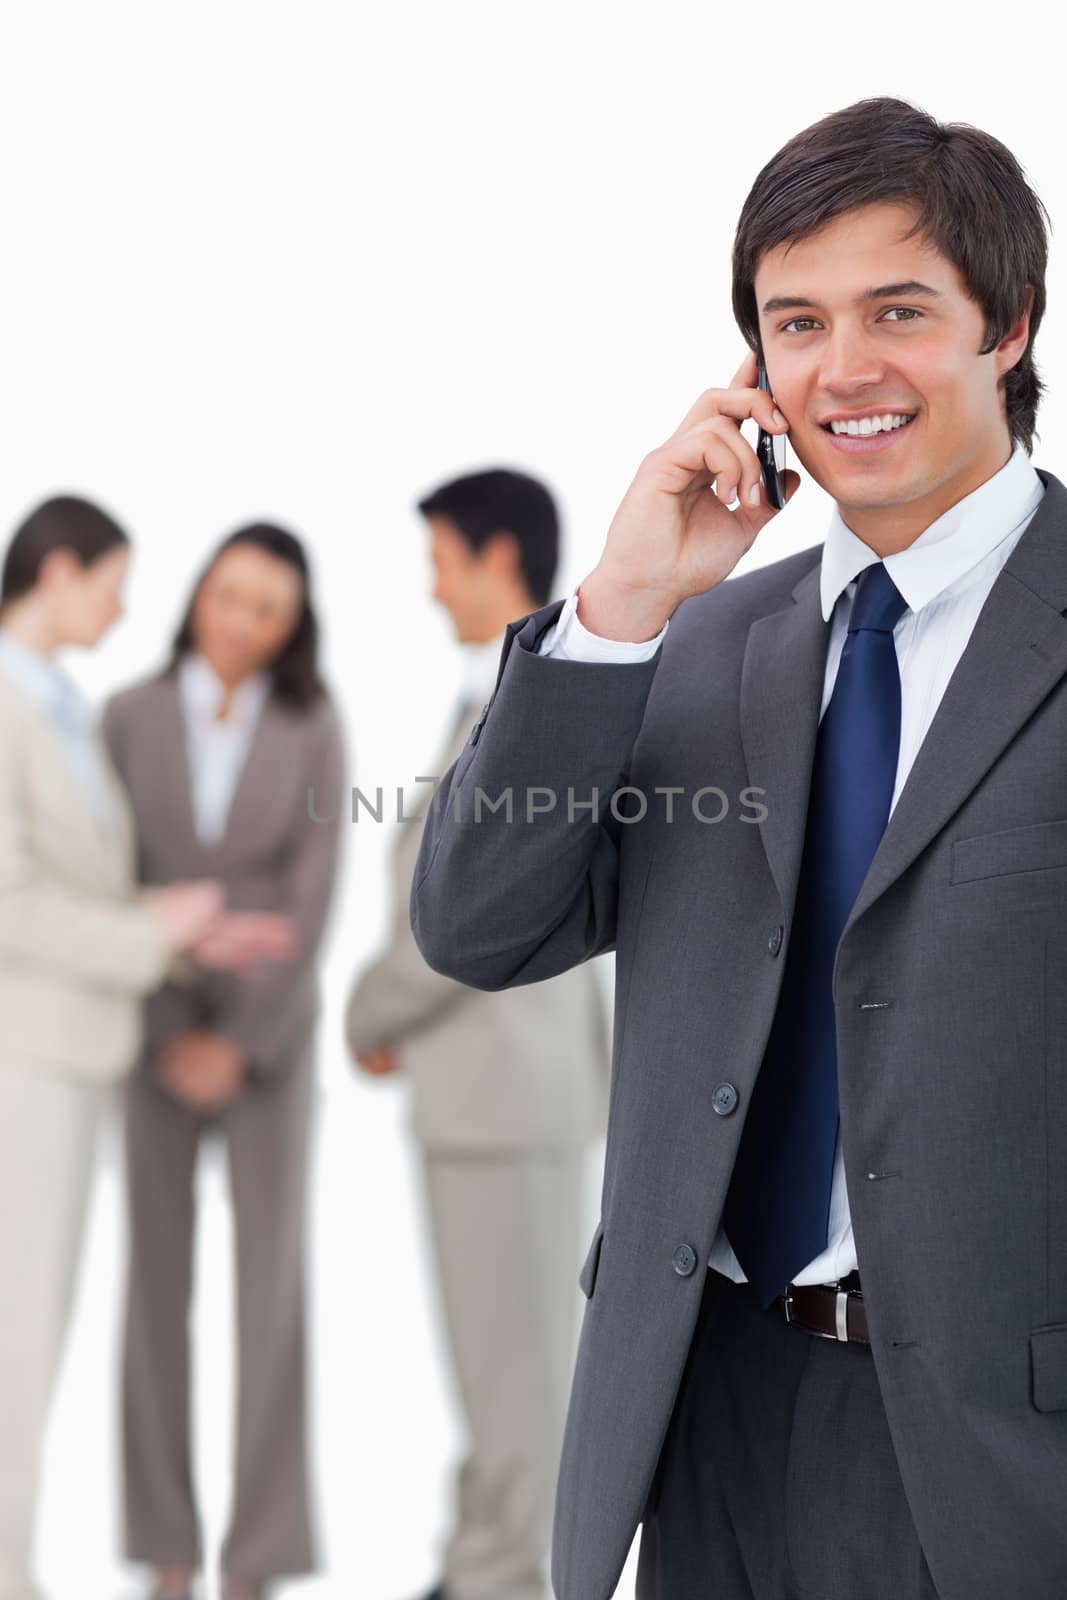 Smiling salesman on cellphone with team behind him by Wavebreakmedia